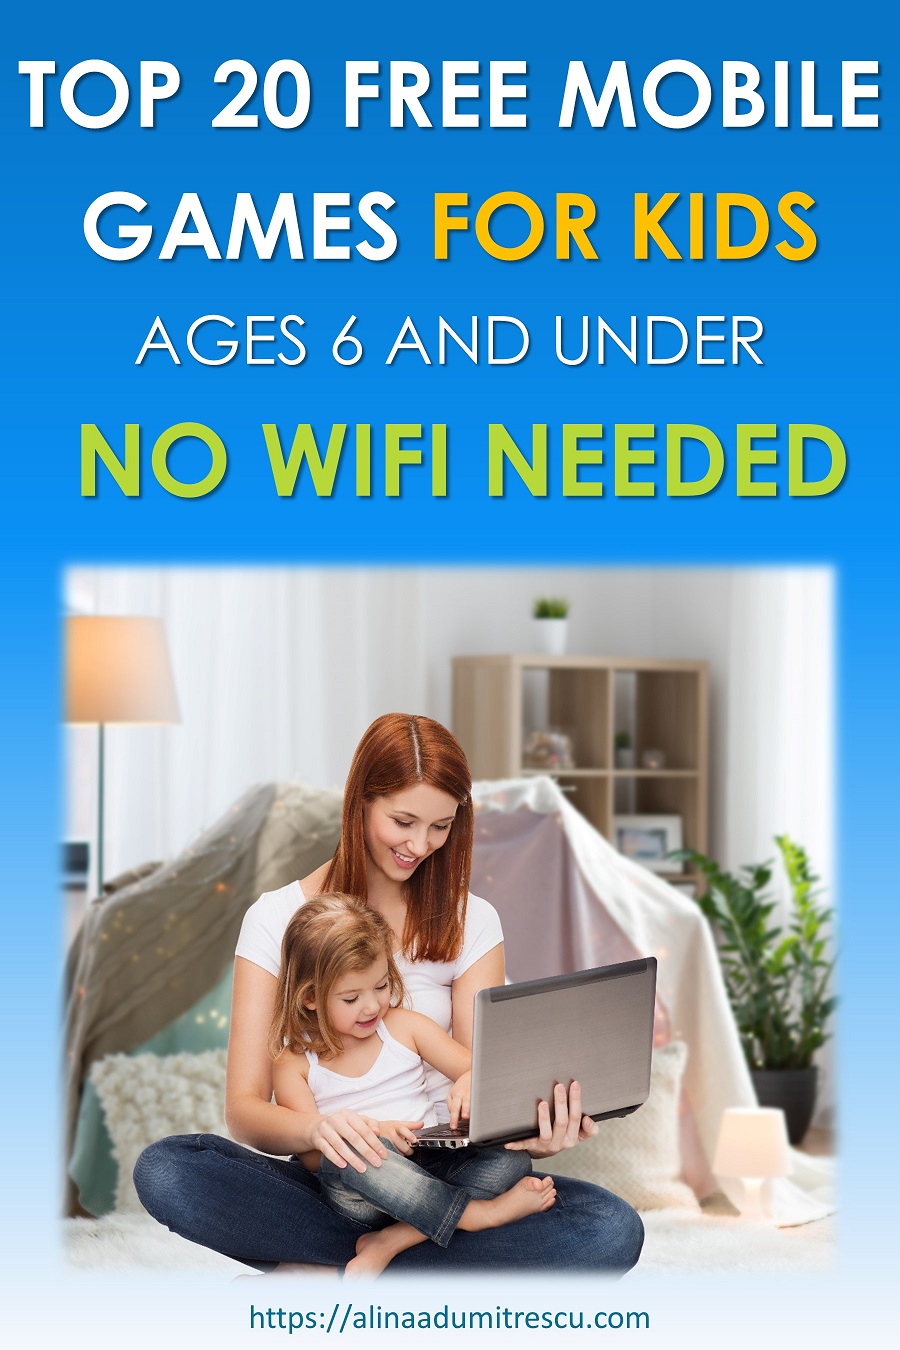 Top 20 Free Mobile Games for Kids Ages 6 and under. No WiFi needed.